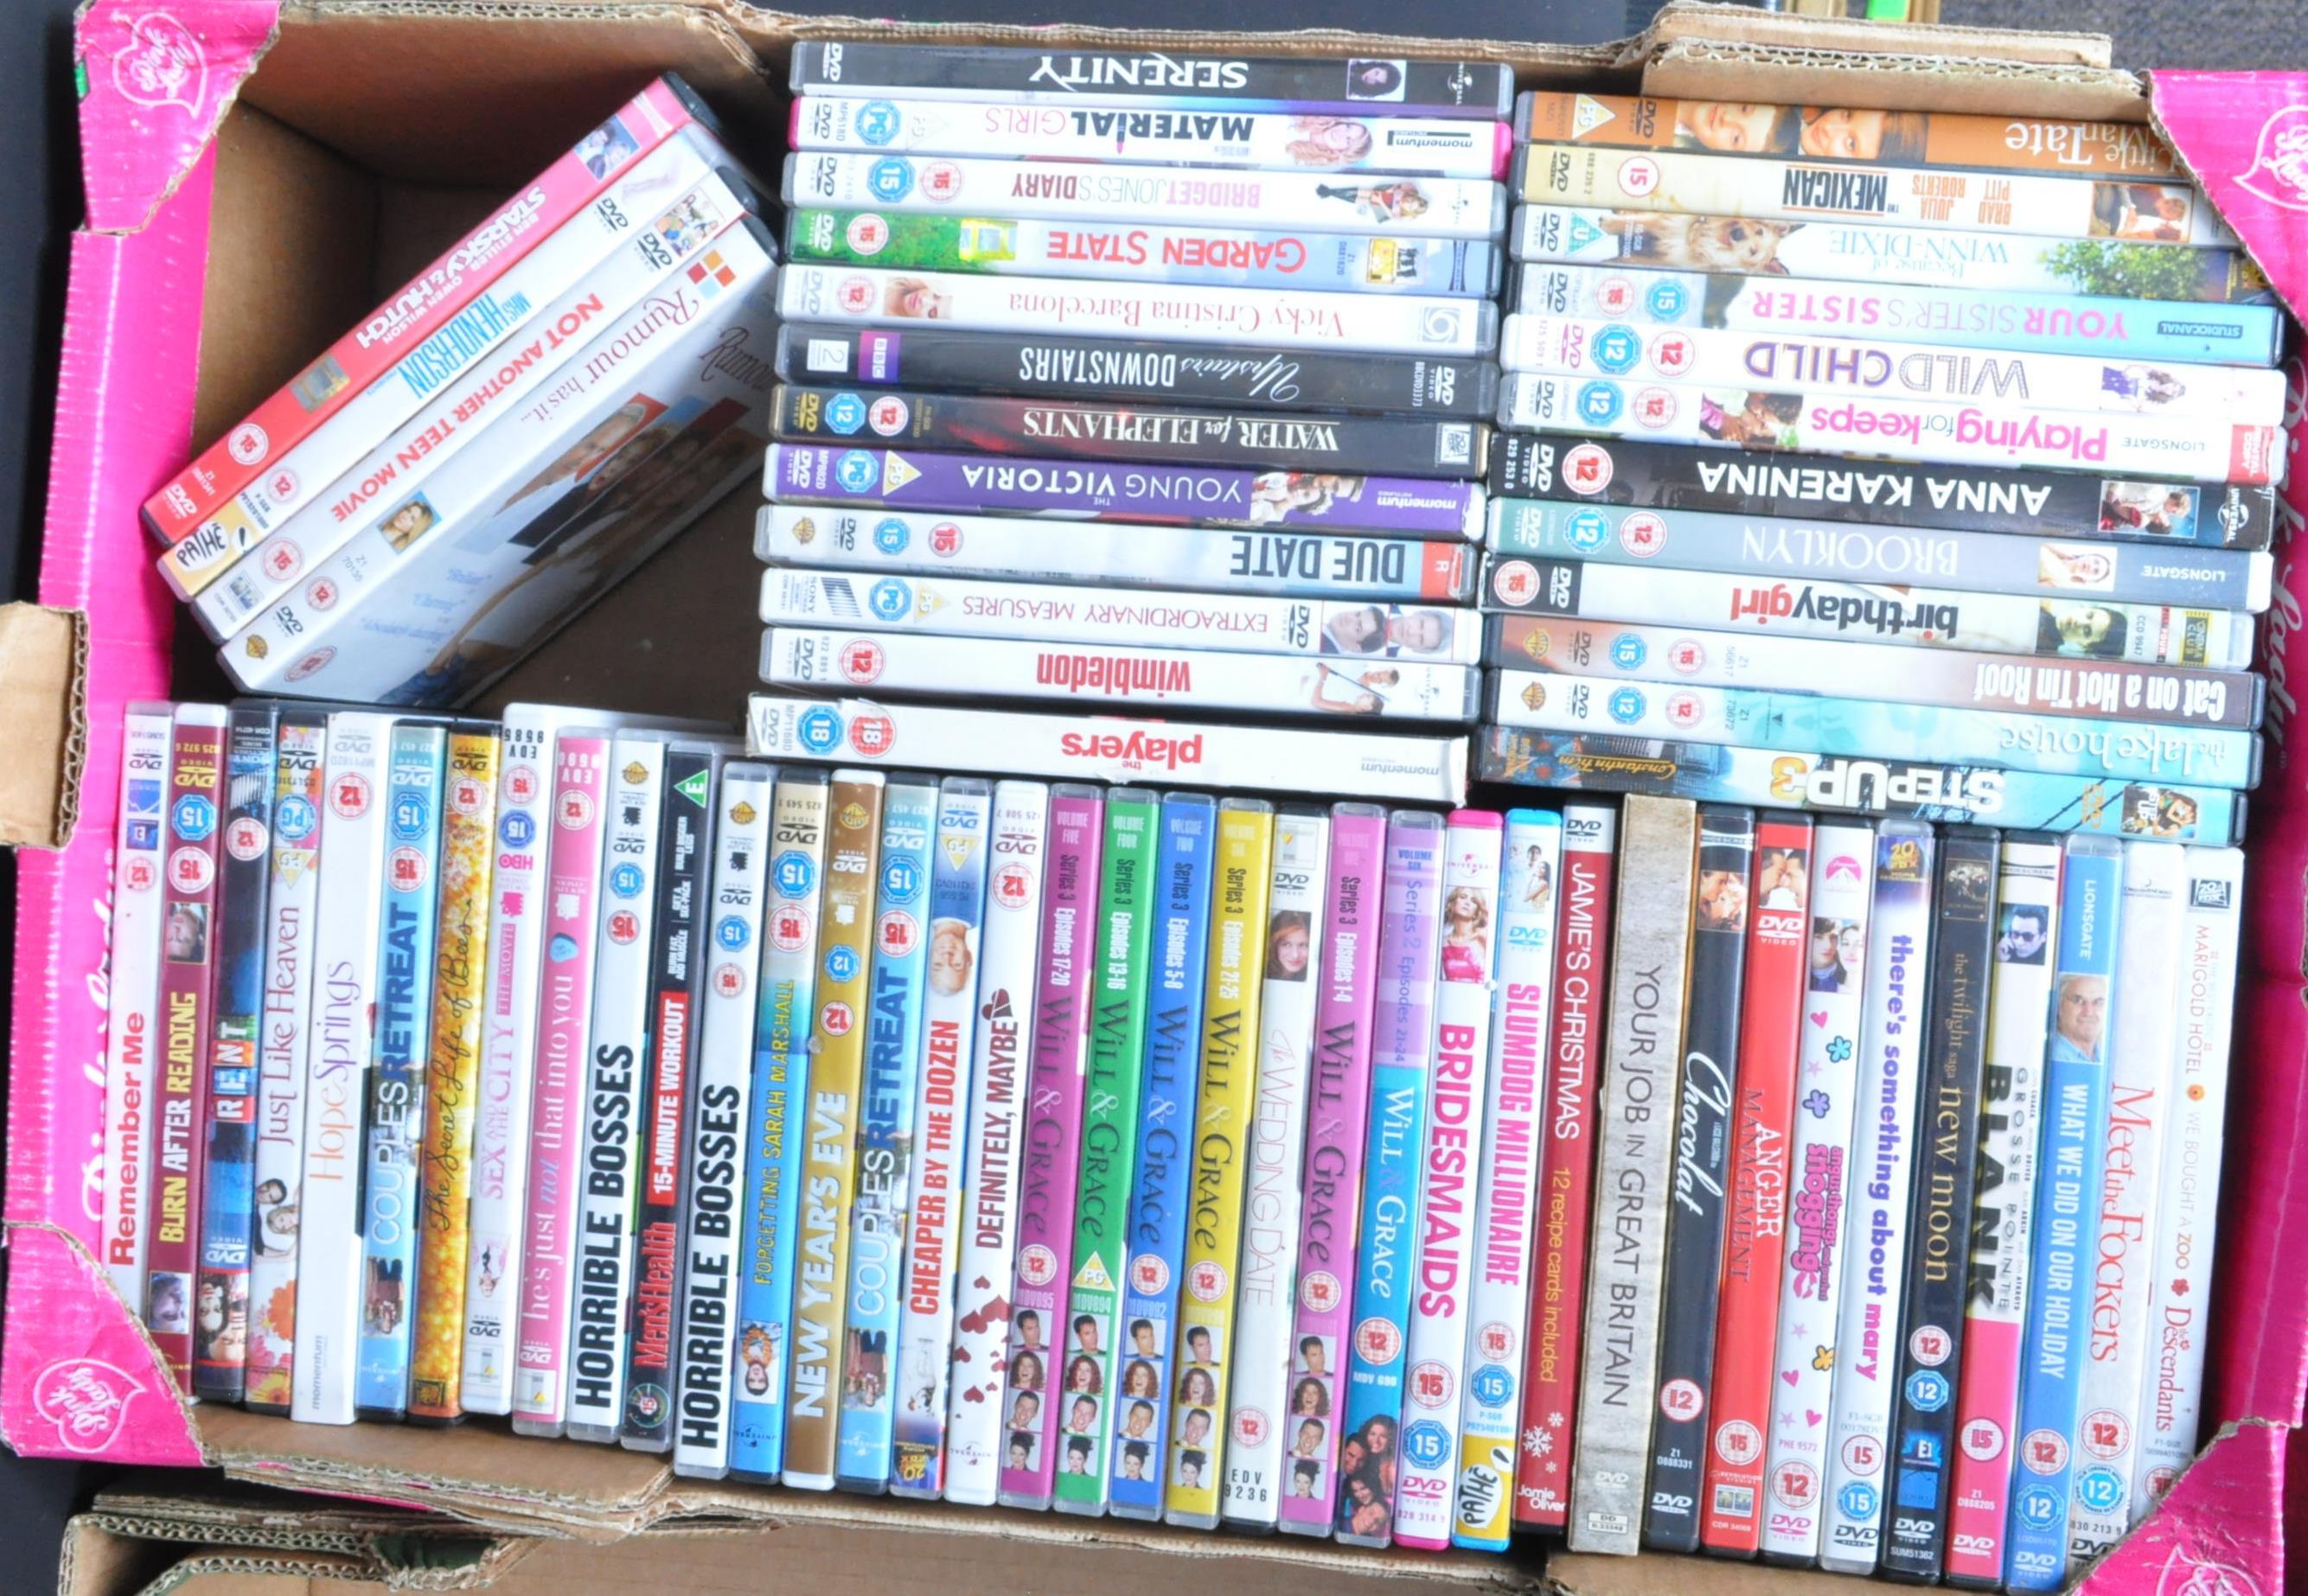 LARGE COLLECTION OF DVD FILMS - 'CHICK FLICK' GENRE & MORE - Image 3 of 3